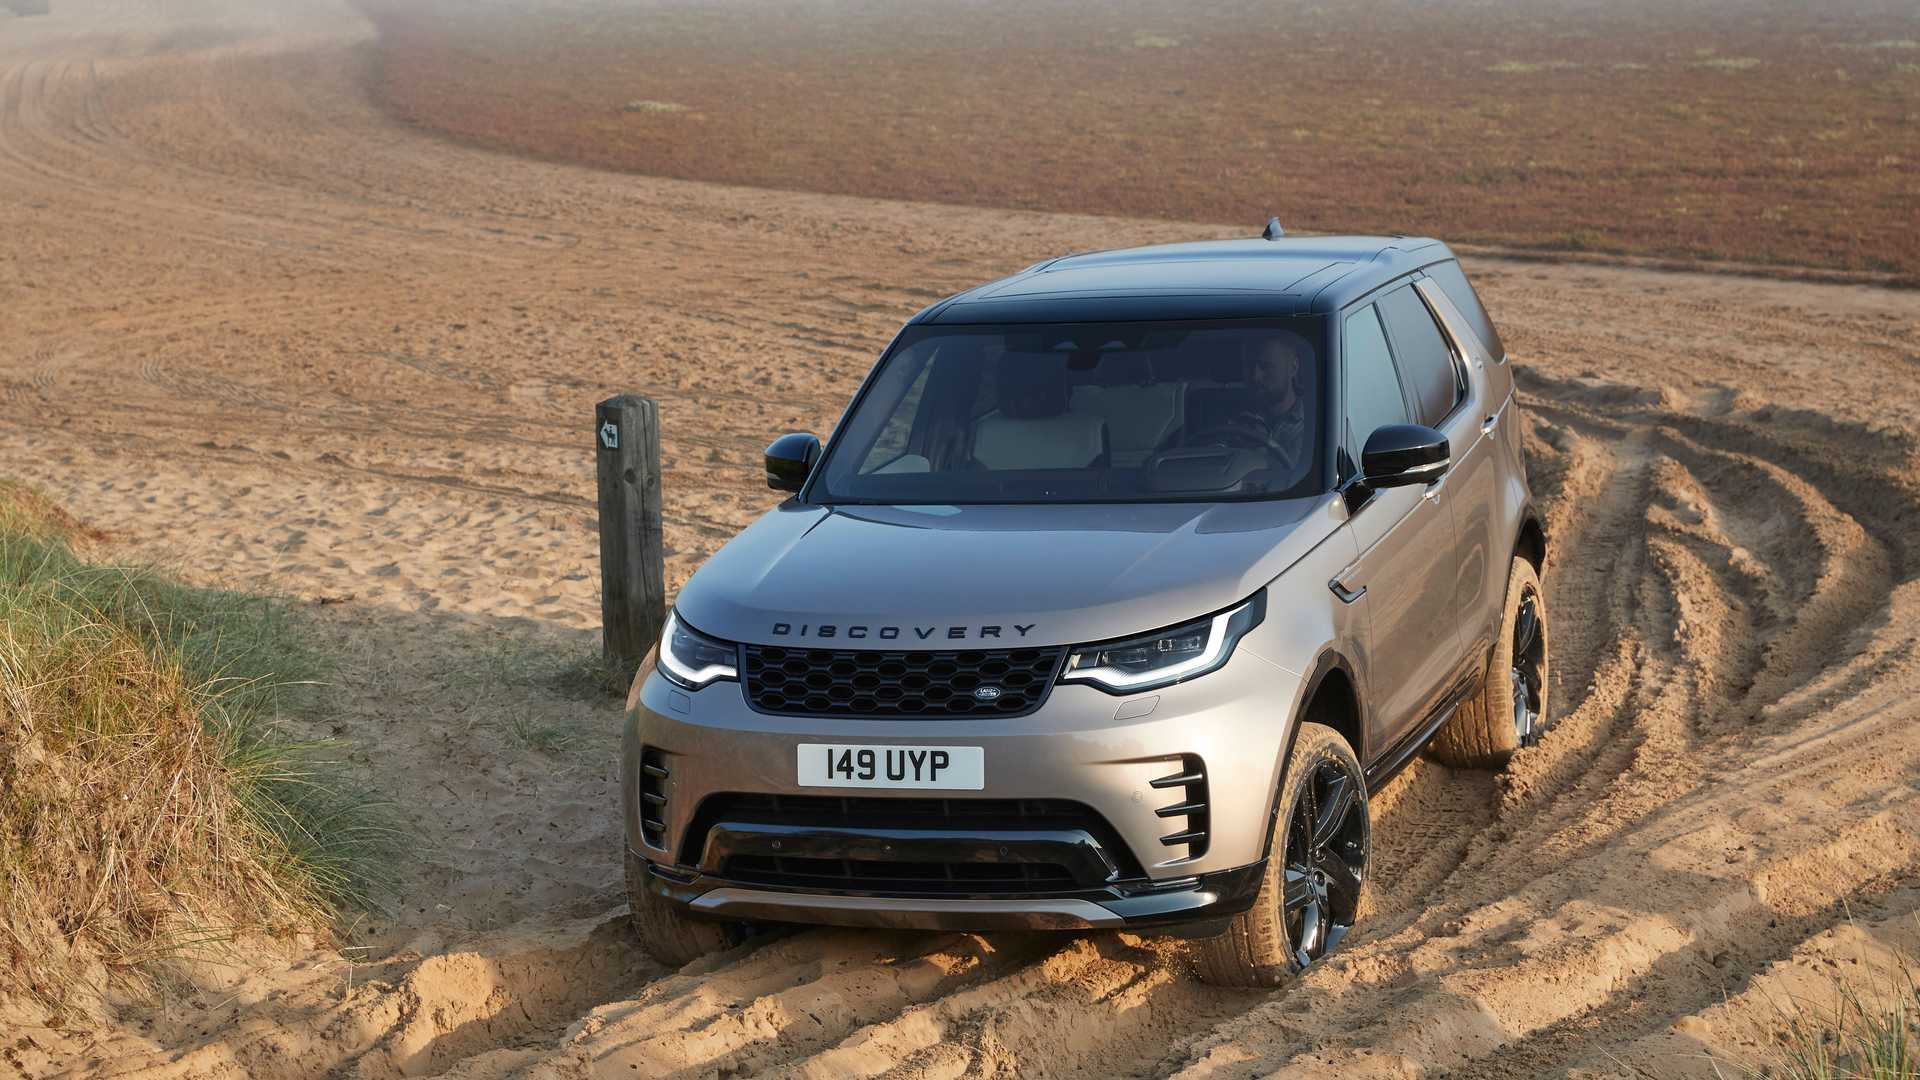 Jaguar Land Rover Explores Potential for Electric Vehicle Manufacturing in India